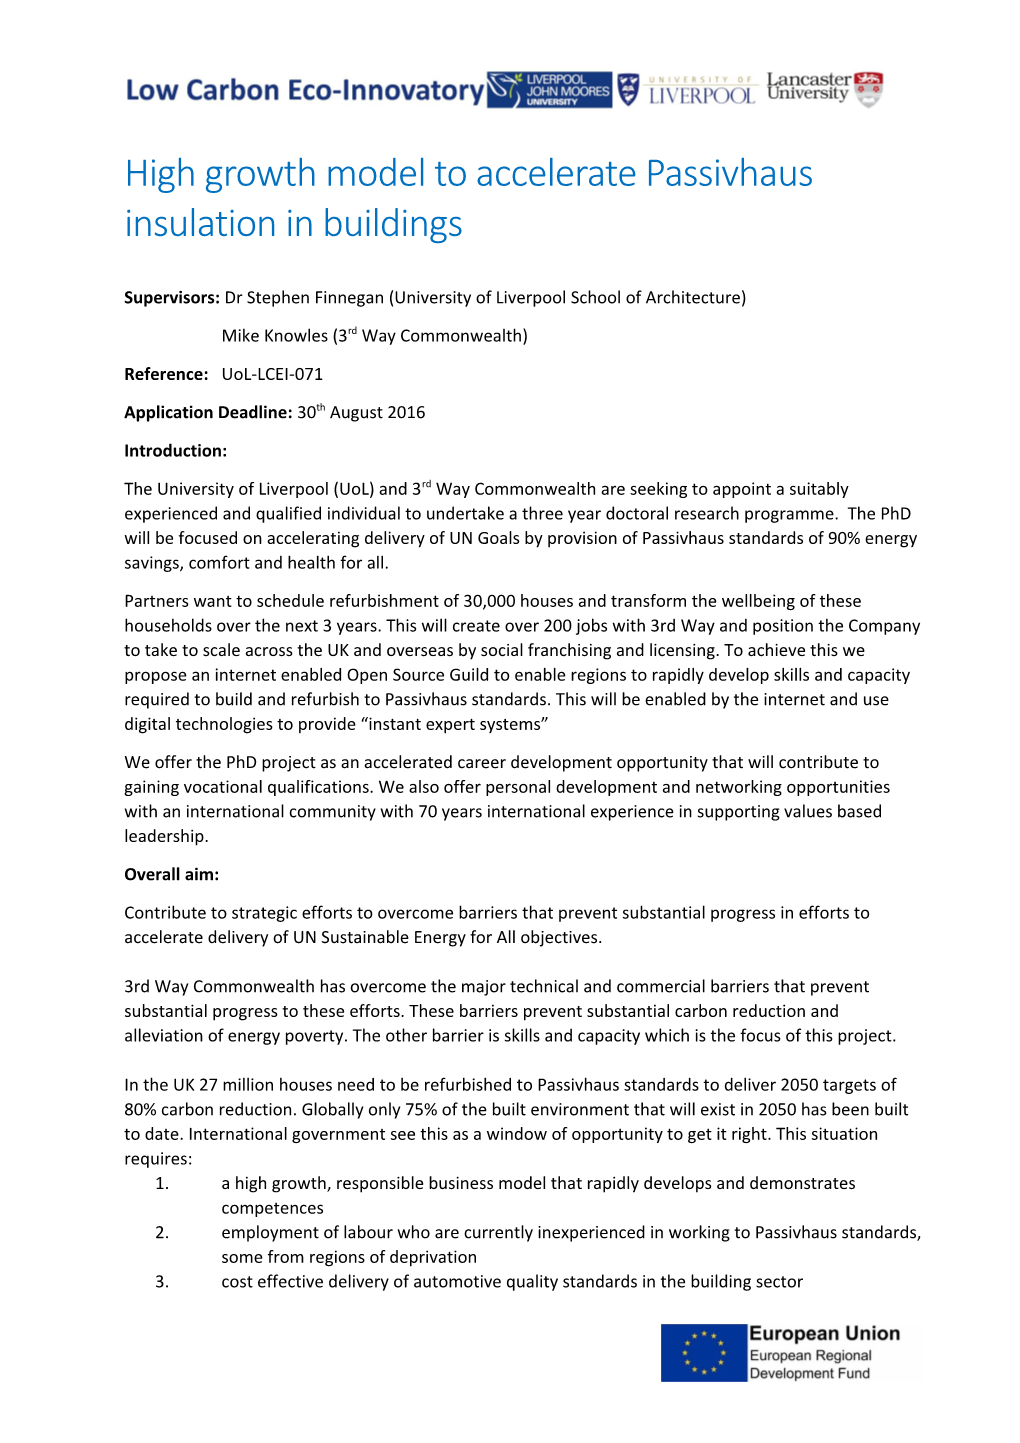 High Growth Model to Accelerate Passivhaus Insulation in Buildings